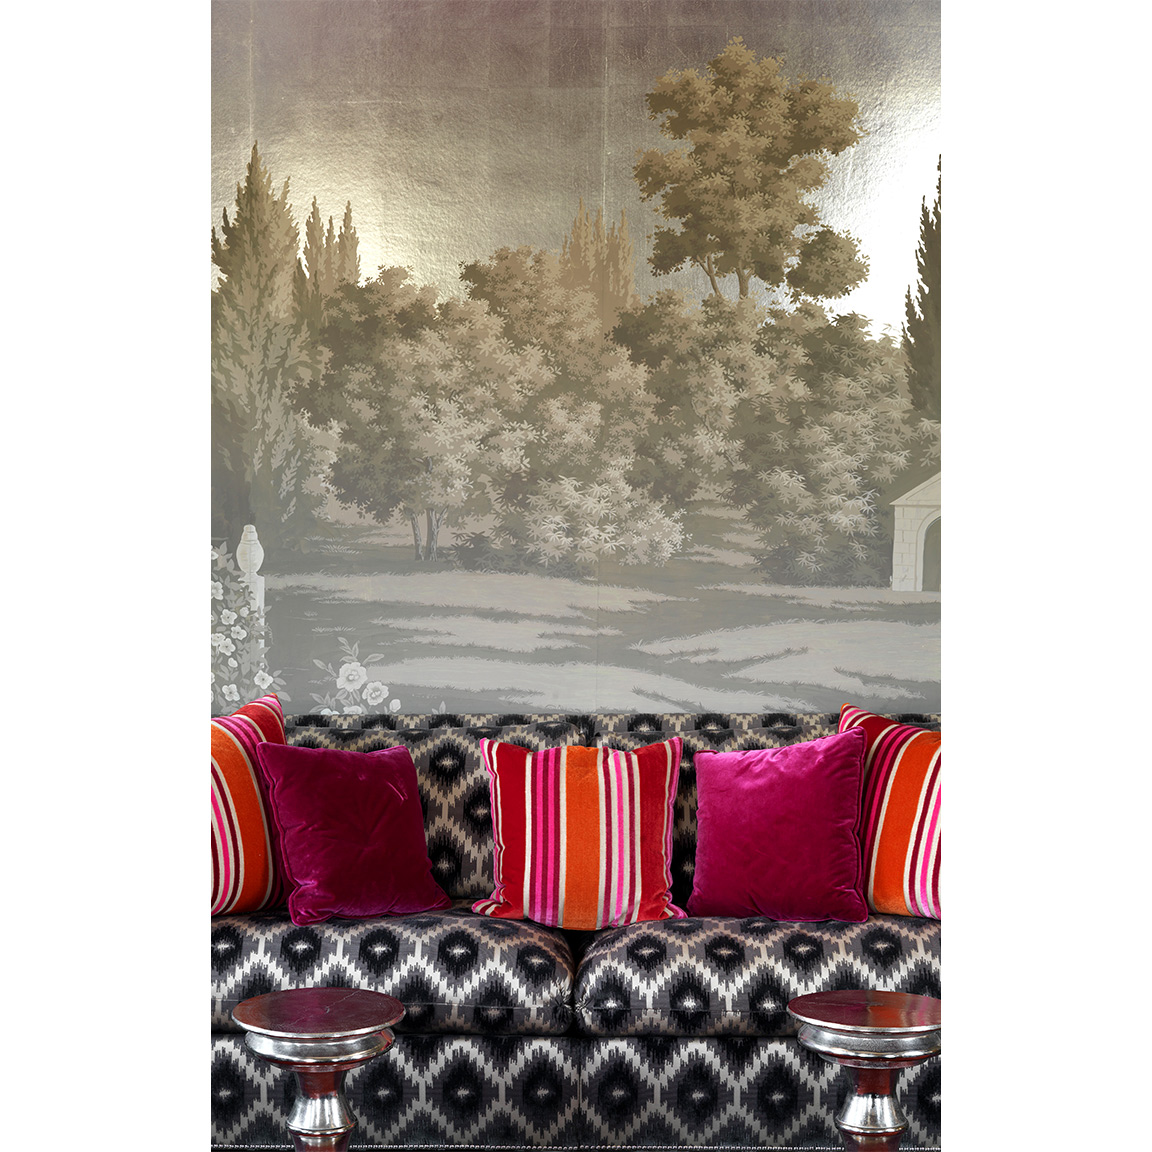 countryside wallpaper behind sofa with pillows